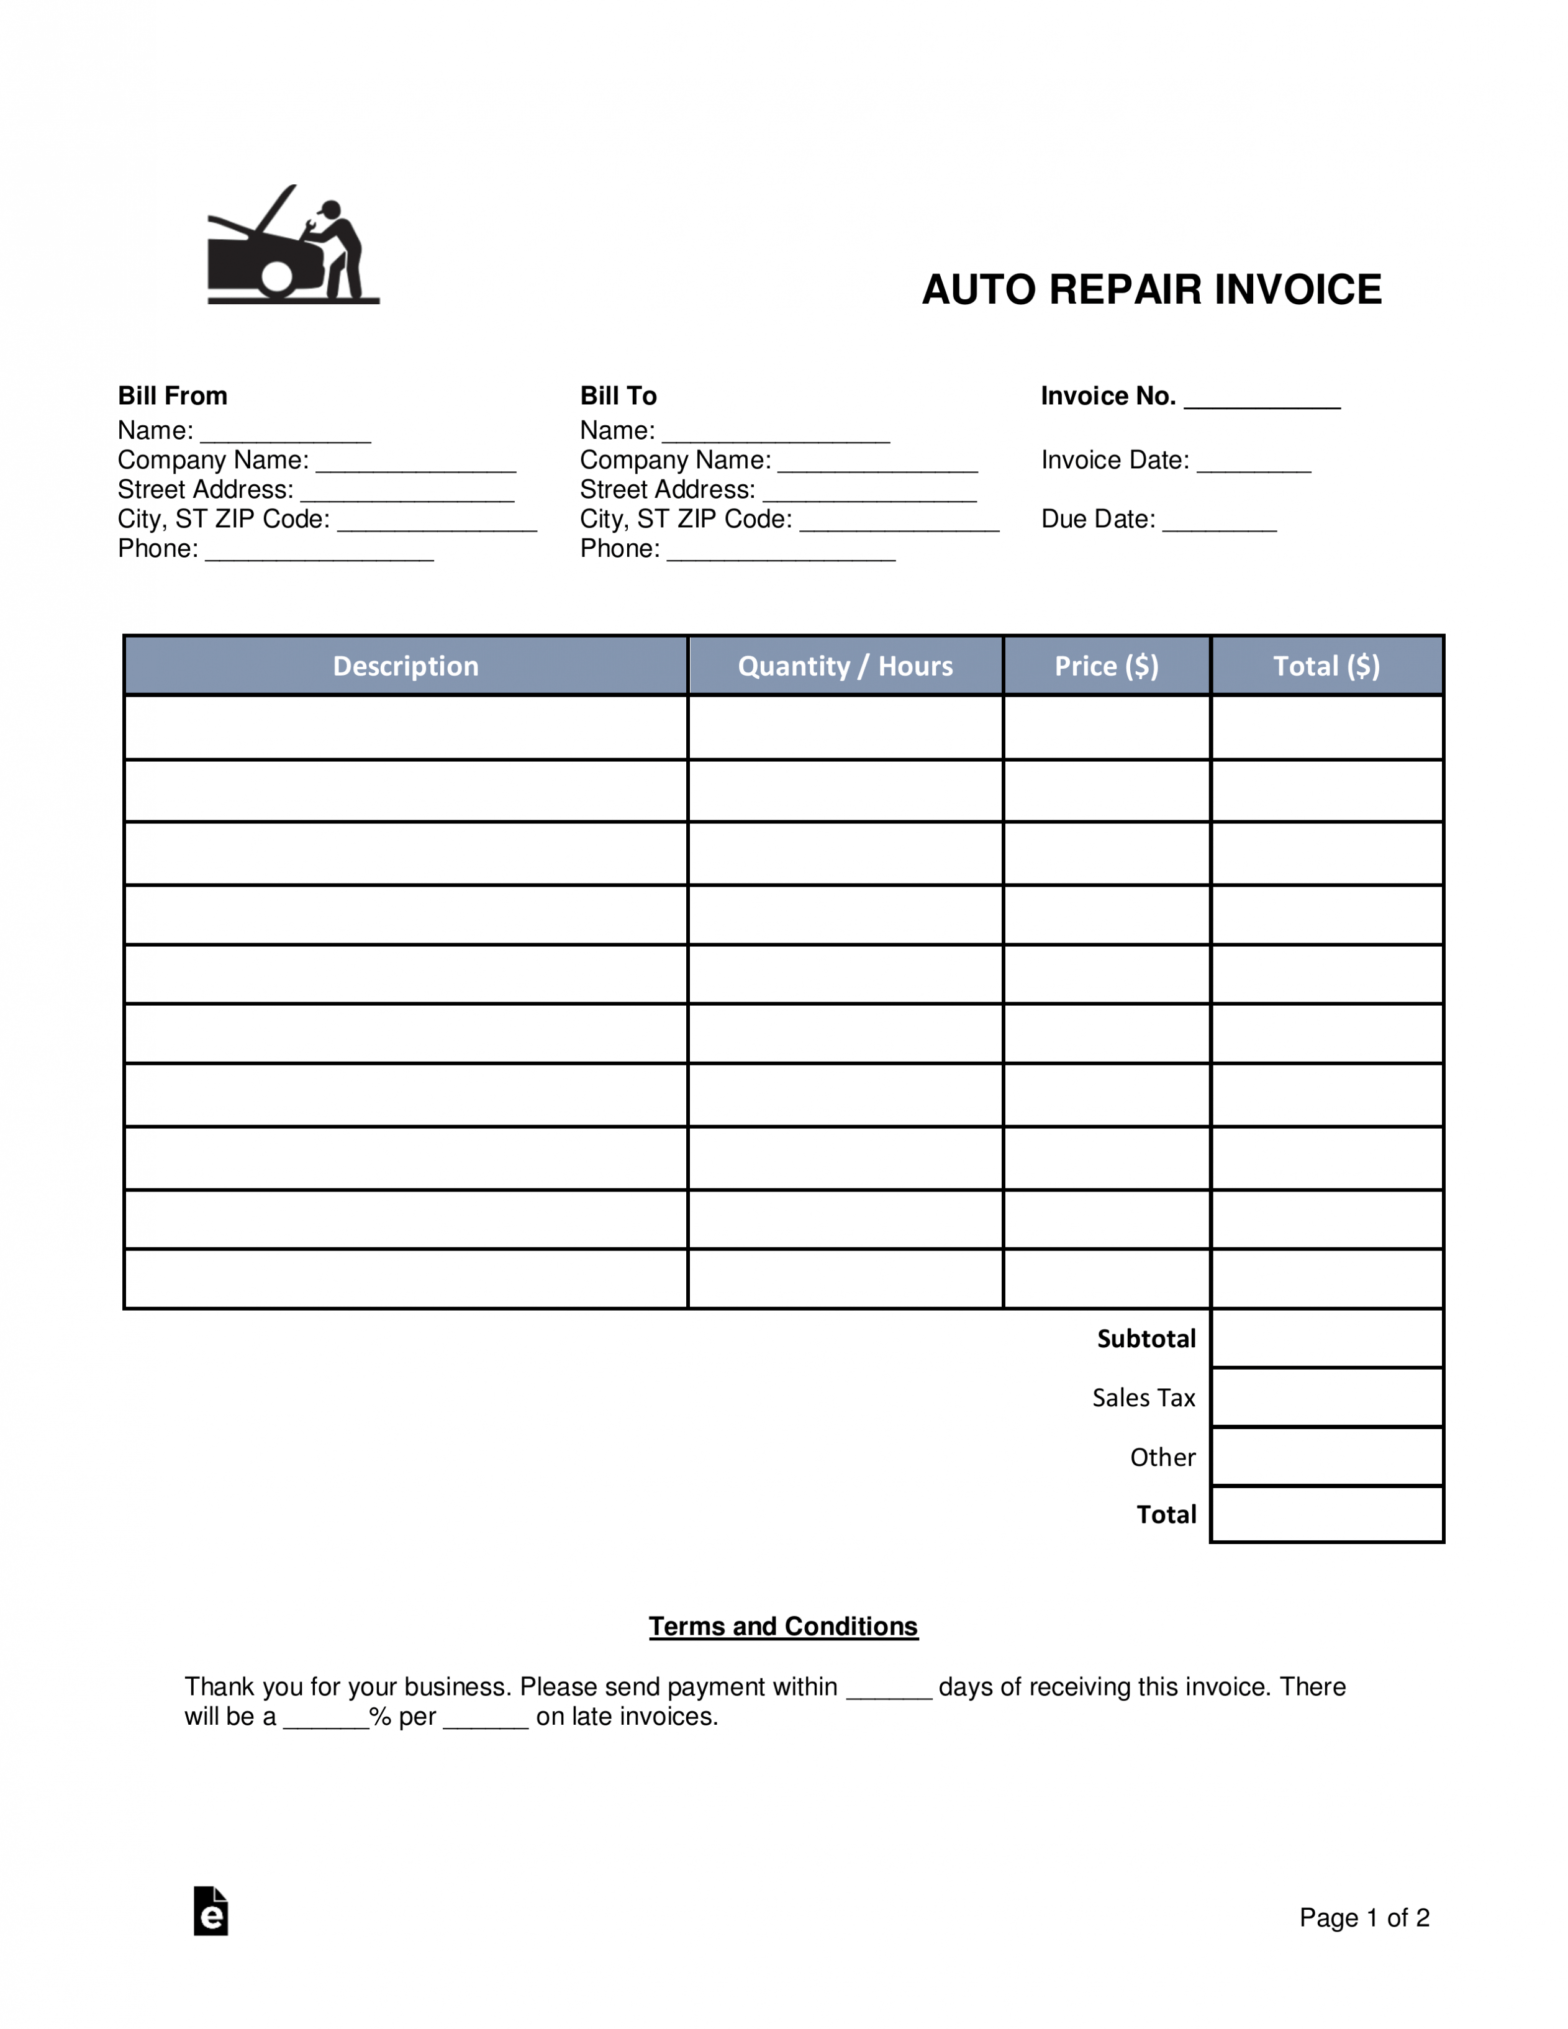 Free Auto Body (Mechanic) Invoice Template - Word | Pdf | Eforms throughout Mechanic Shop Invoice Templates